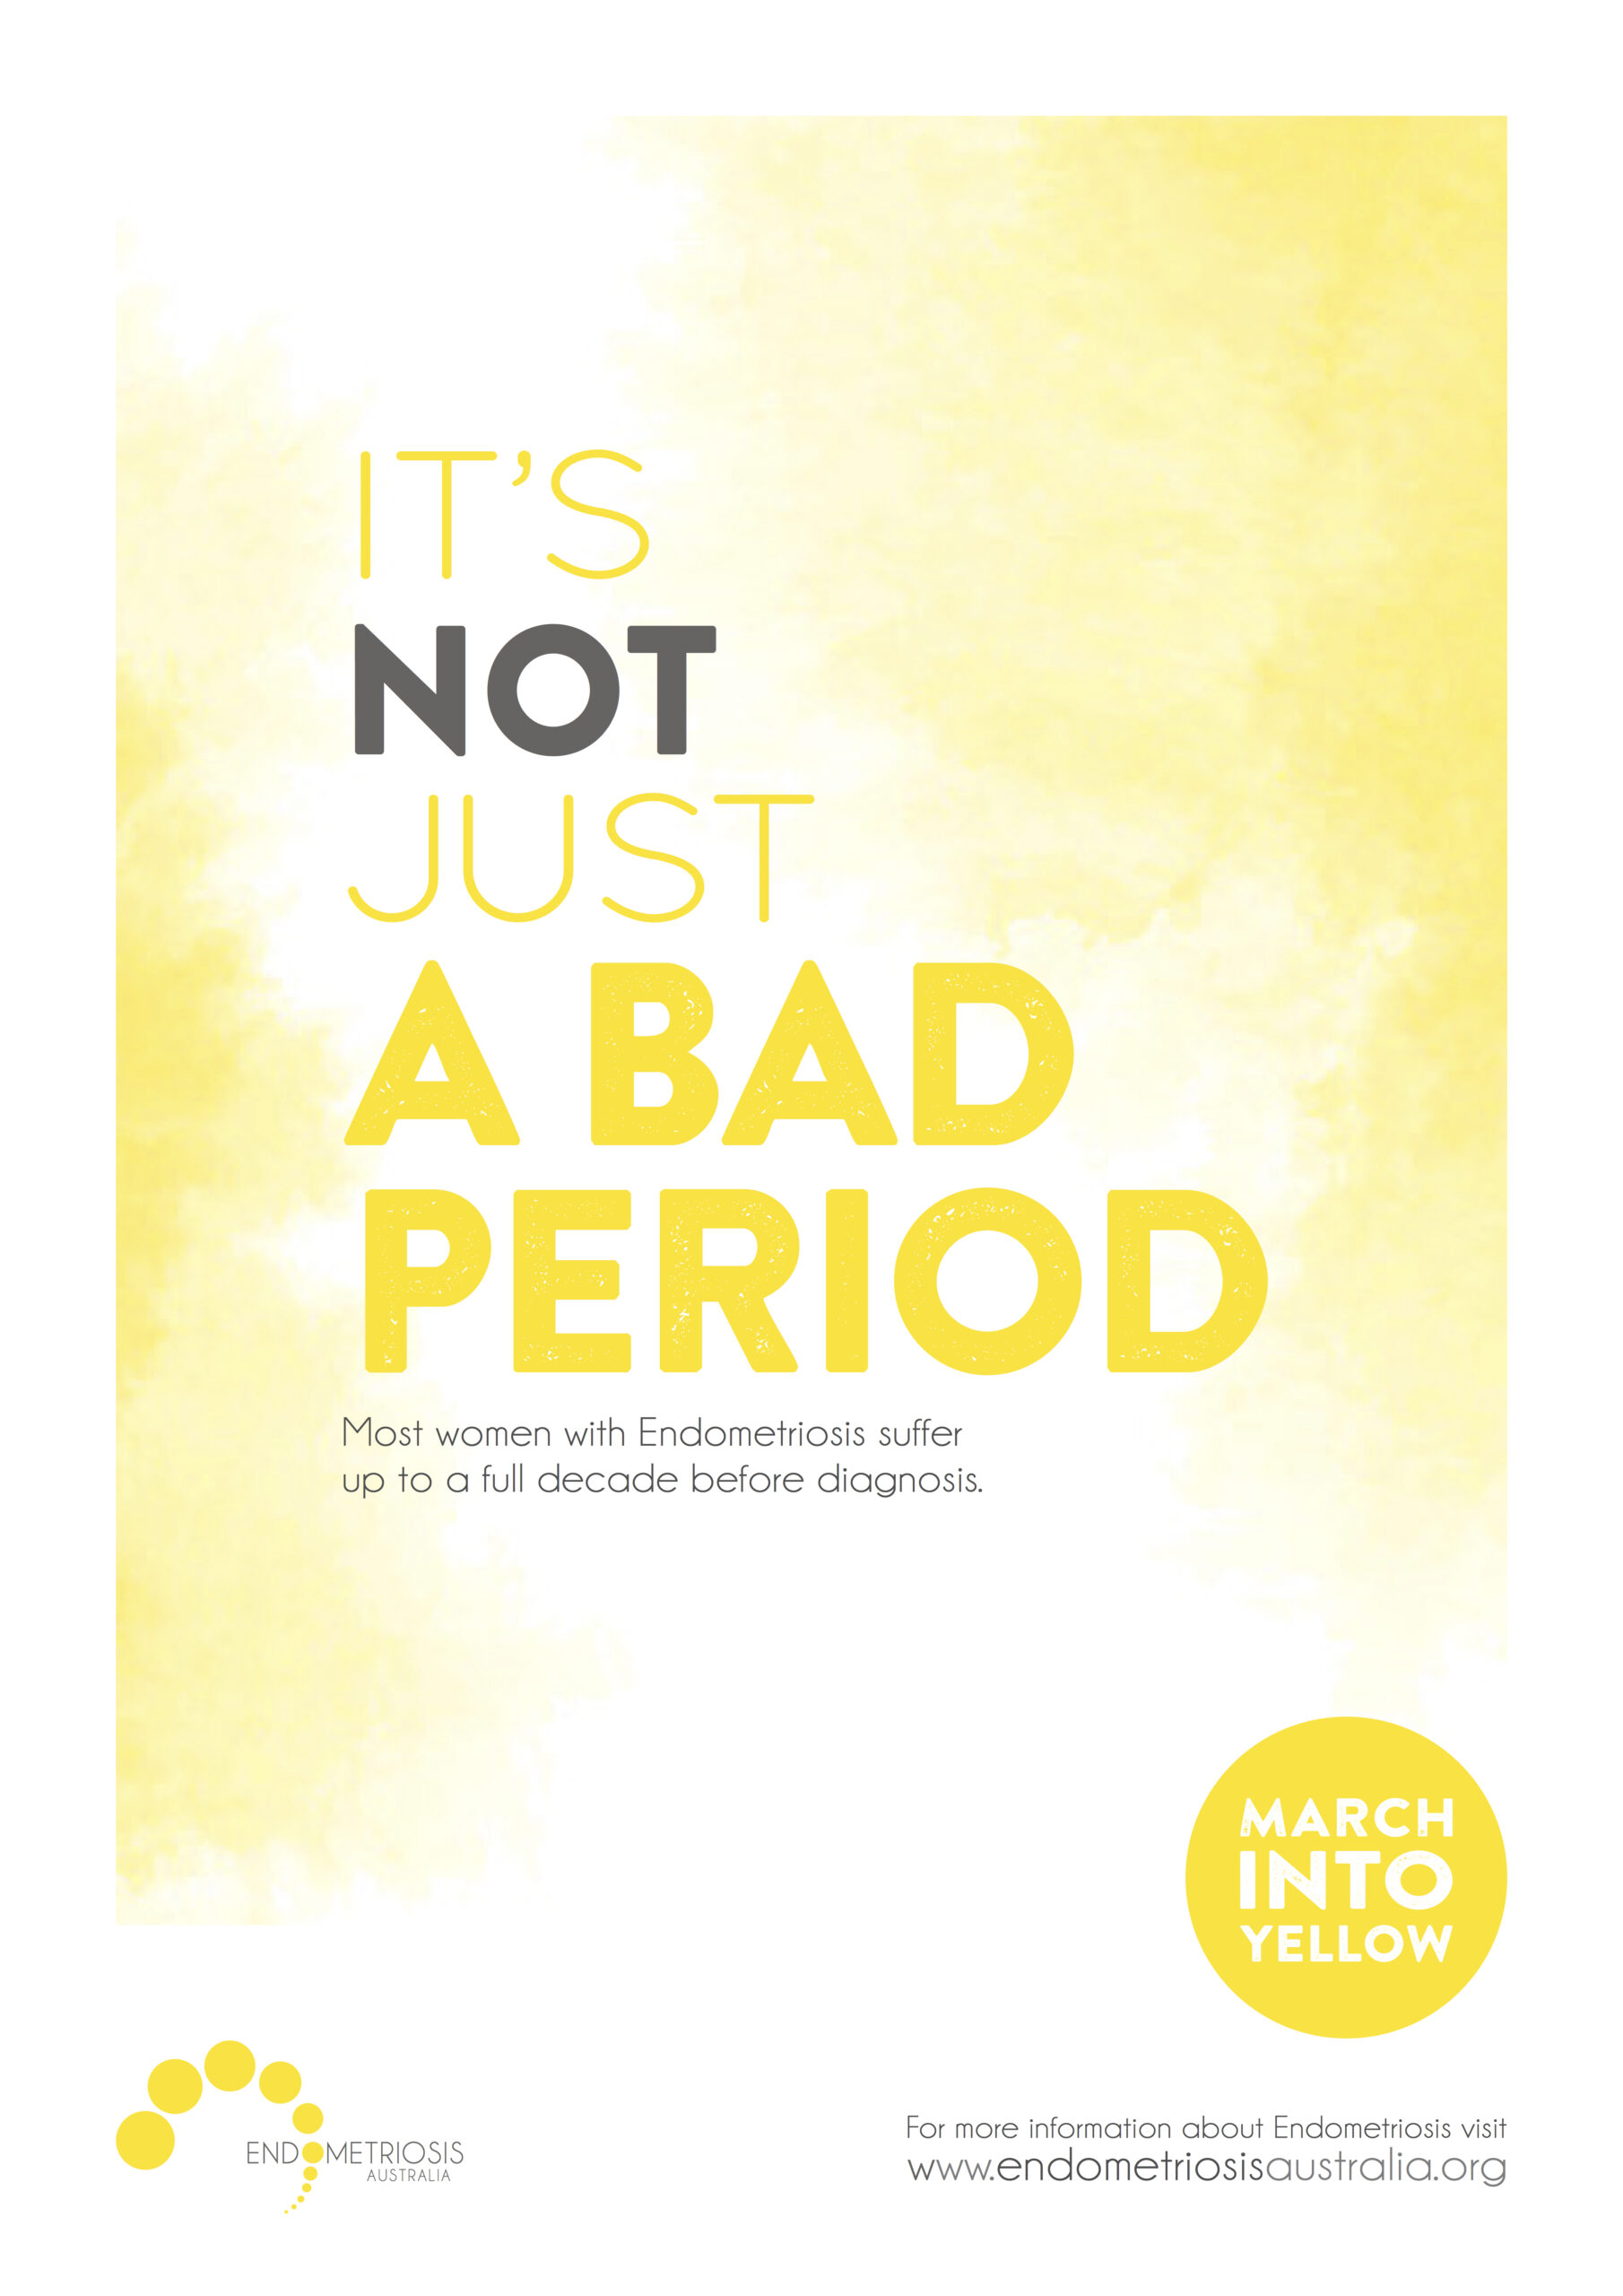 Periods are a pain